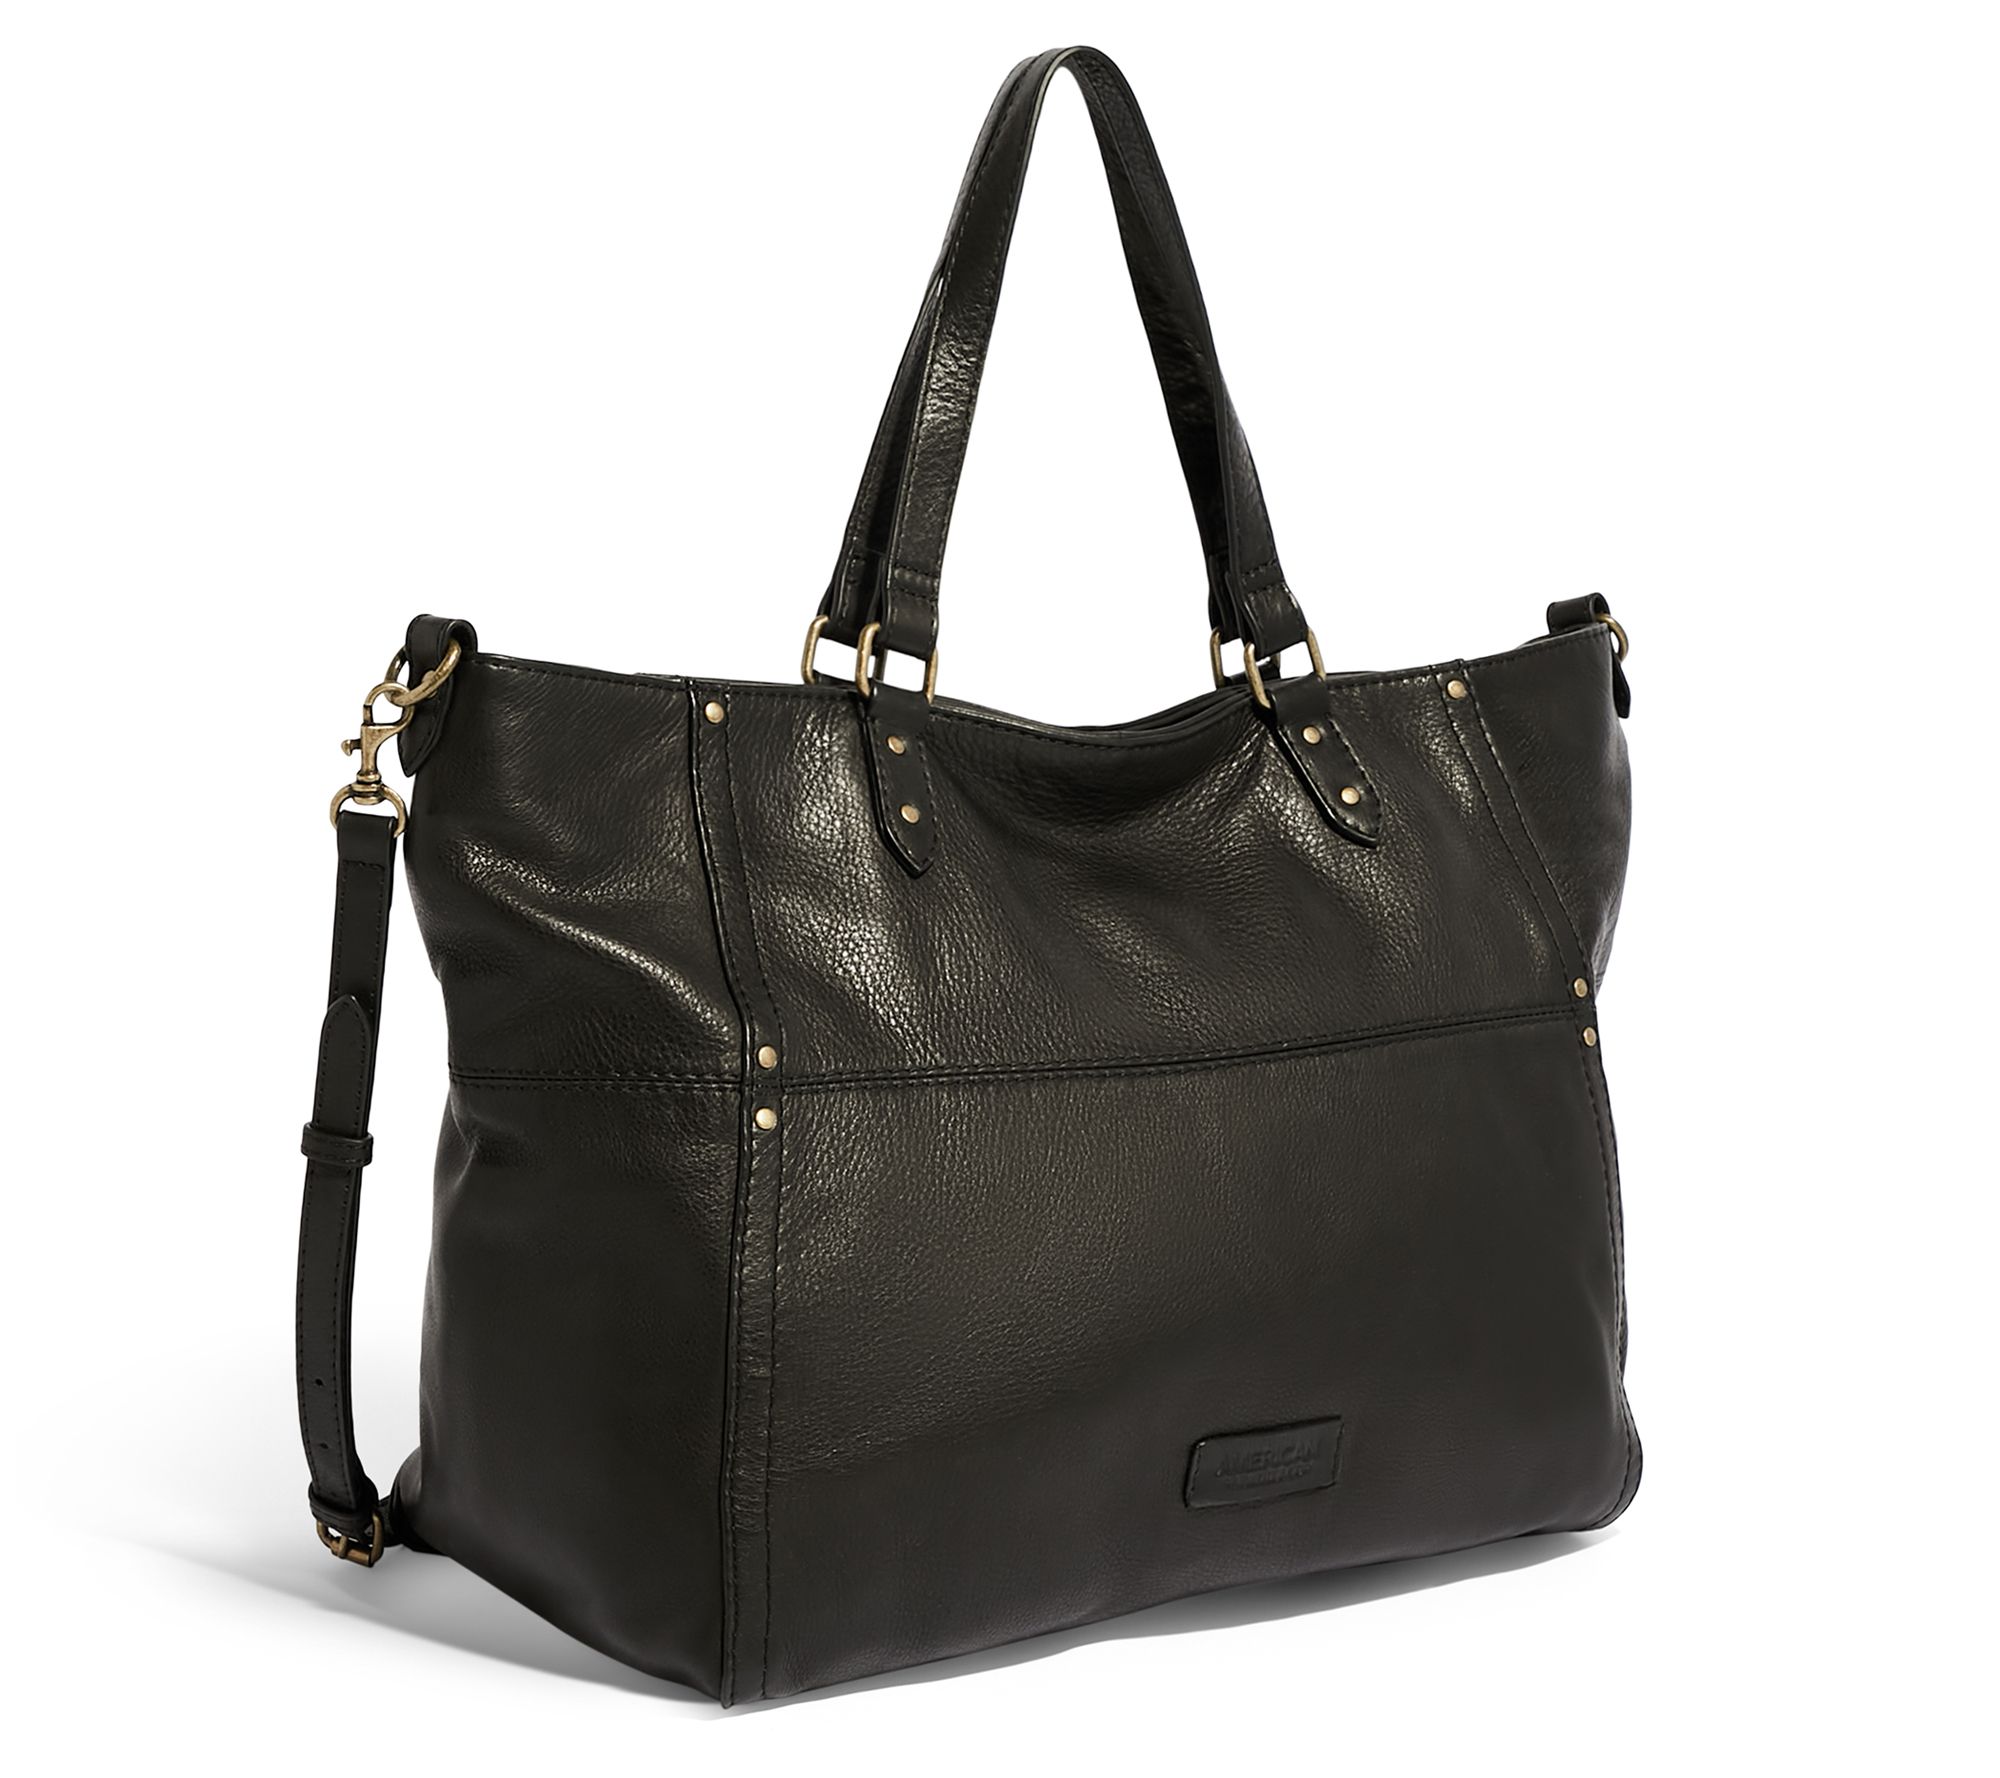 American Leather Co. Lolo Large Tote - QVC.com